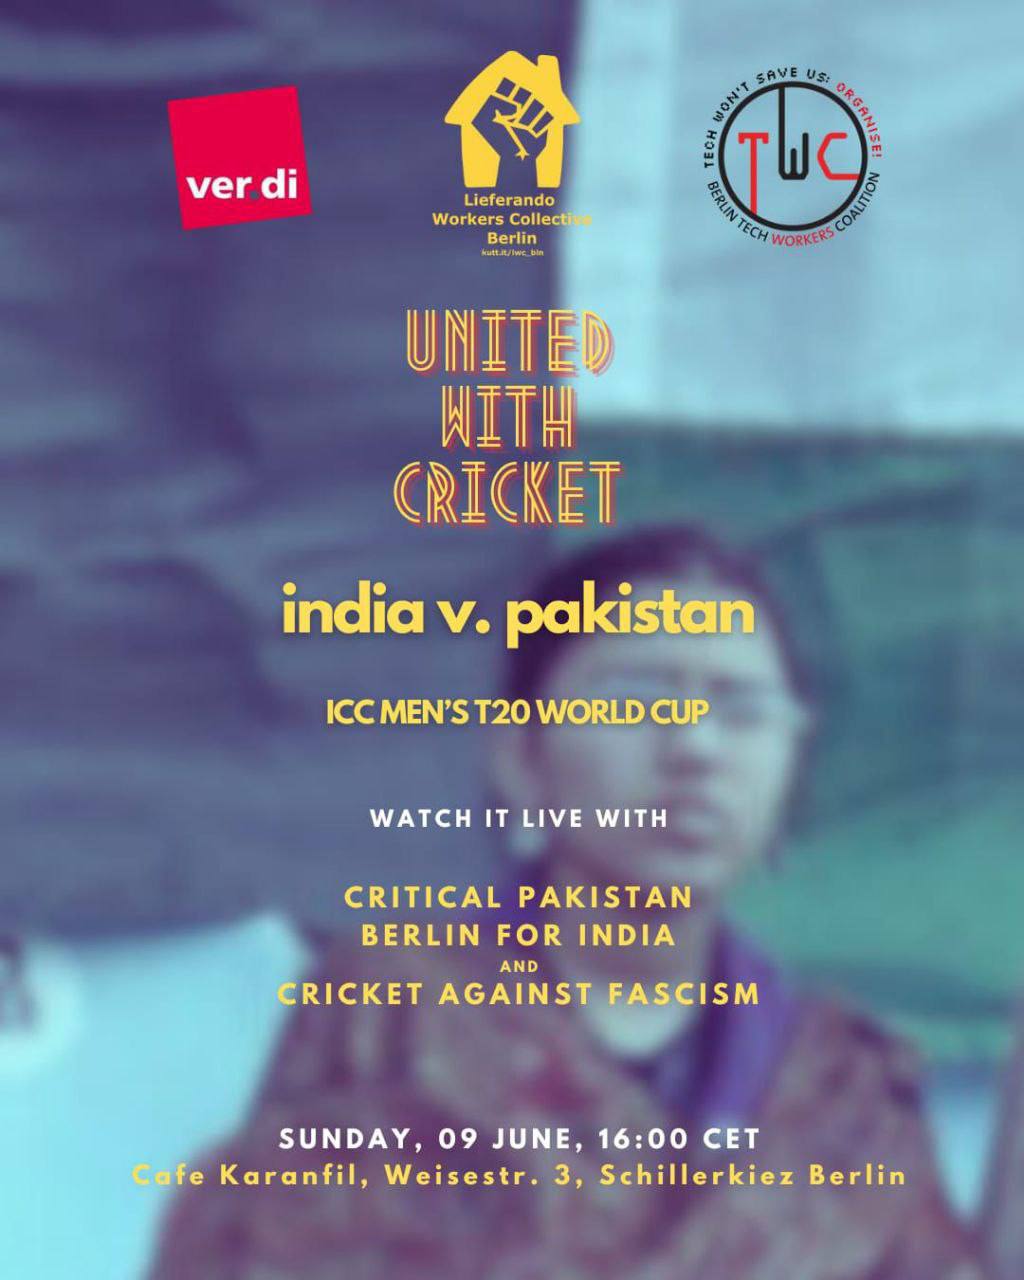 india v pakistan, watch it live with critical pakistan, berlin for india and cricket against fascism